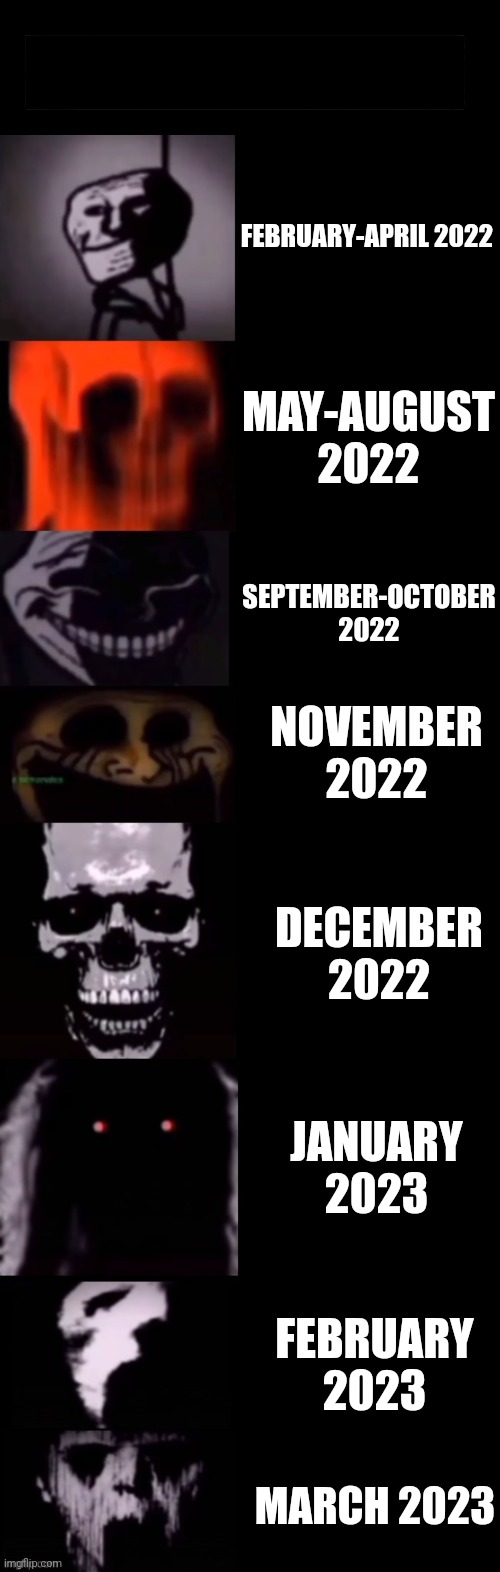 How the past couple of years have been Part 2 | FEBRUARY-APRIL 2022; MAY-AUGUST 2022; SEPTEMBER-OCTOBER 2022; NOVEMBER 2022; DECEMBER 2022; JANUARY 2023; FEBRUARY 2023; MARCH 2023 | image tagged in mr incredible becoming uncanny,so true memes,2022,2023,covid-19,coronavirus | made w/ Imgflip meme maker